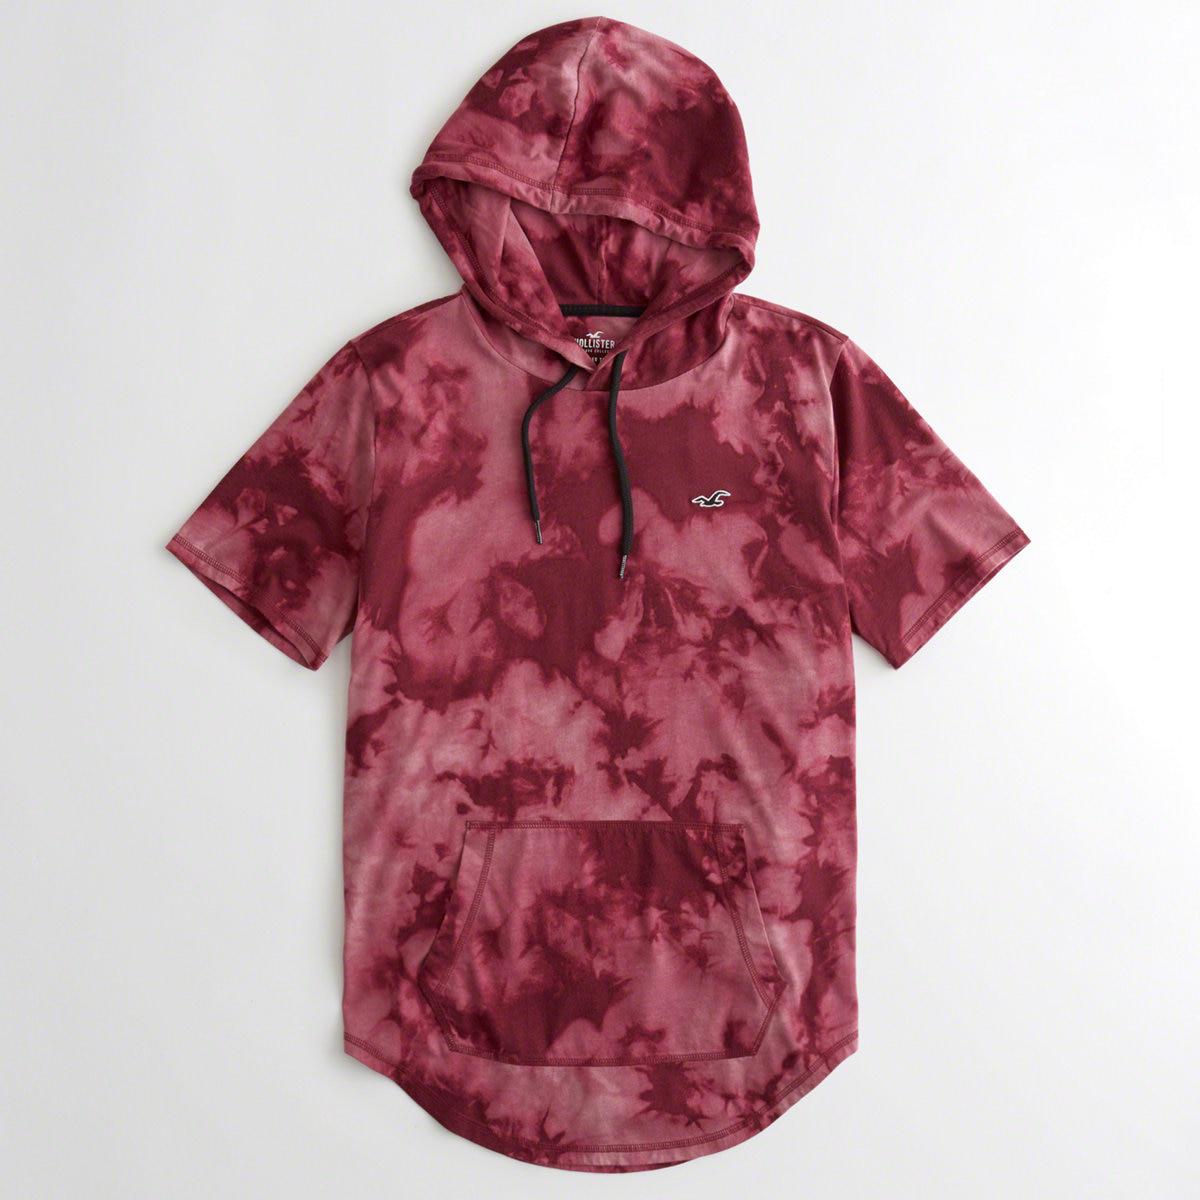 Guys Short Sleeve Tie Dye Hooded T Shirt From Hollister Red